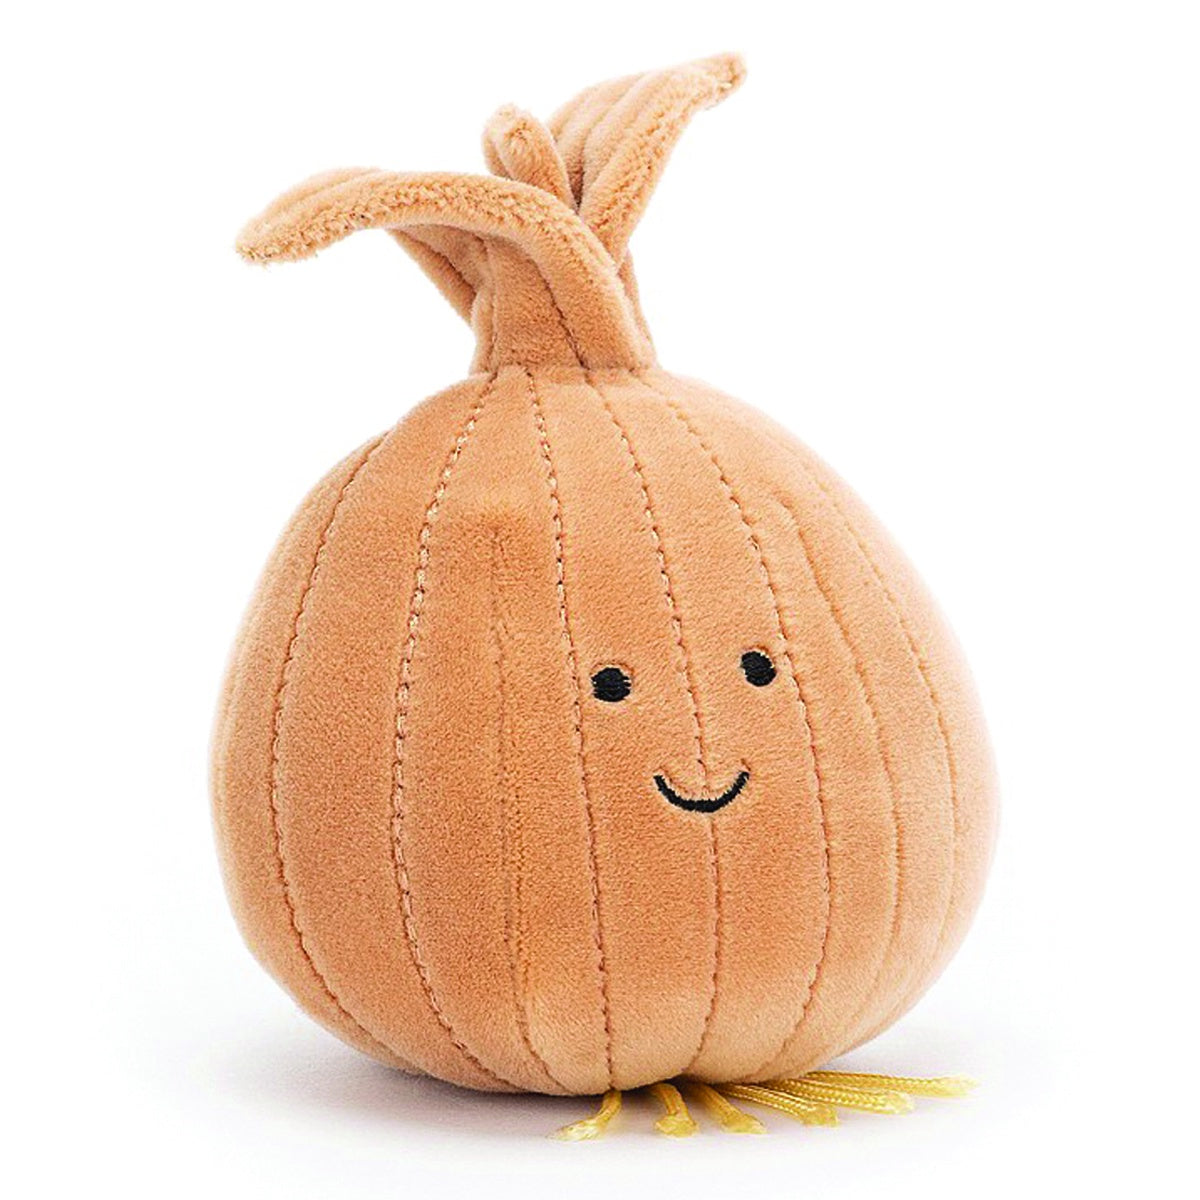 Deer Industries Jellycat Soft Toy Vivacious Vegetable Onion. This soft vegetable plush is a great present for newborn baby, toddler, child, teen, boy or girl. Healthy and fun. Shop Jellycat at Deer Industries. 